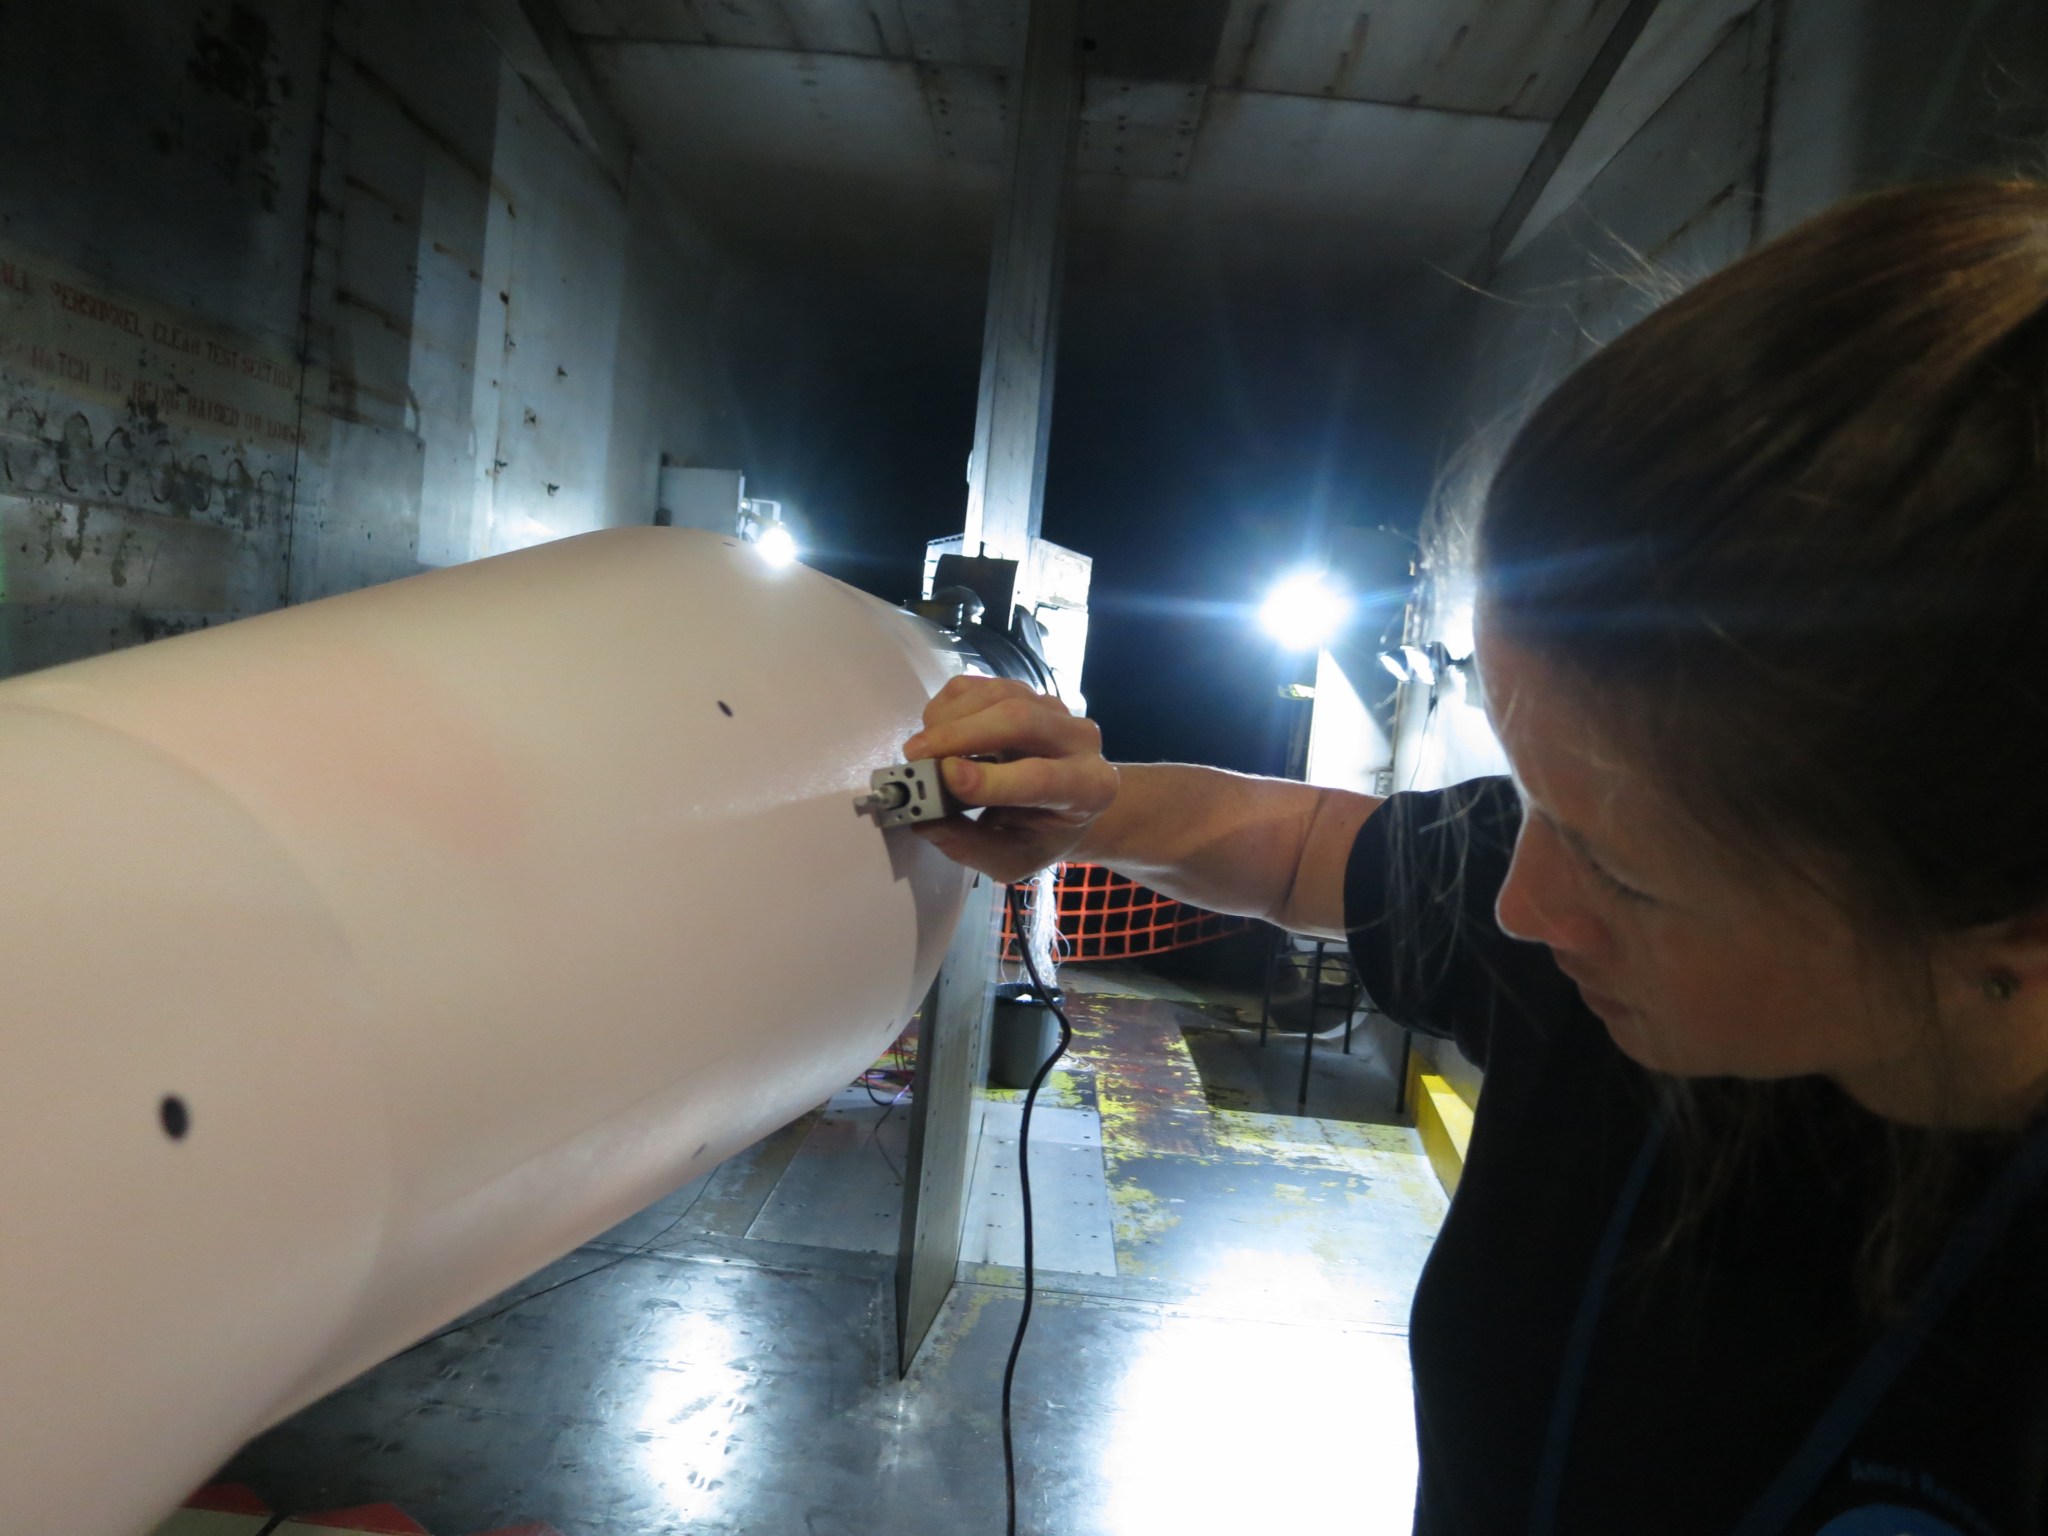 NASA engineer Nettie Roozeboom measures levels of roughness on a launch vehicle model.